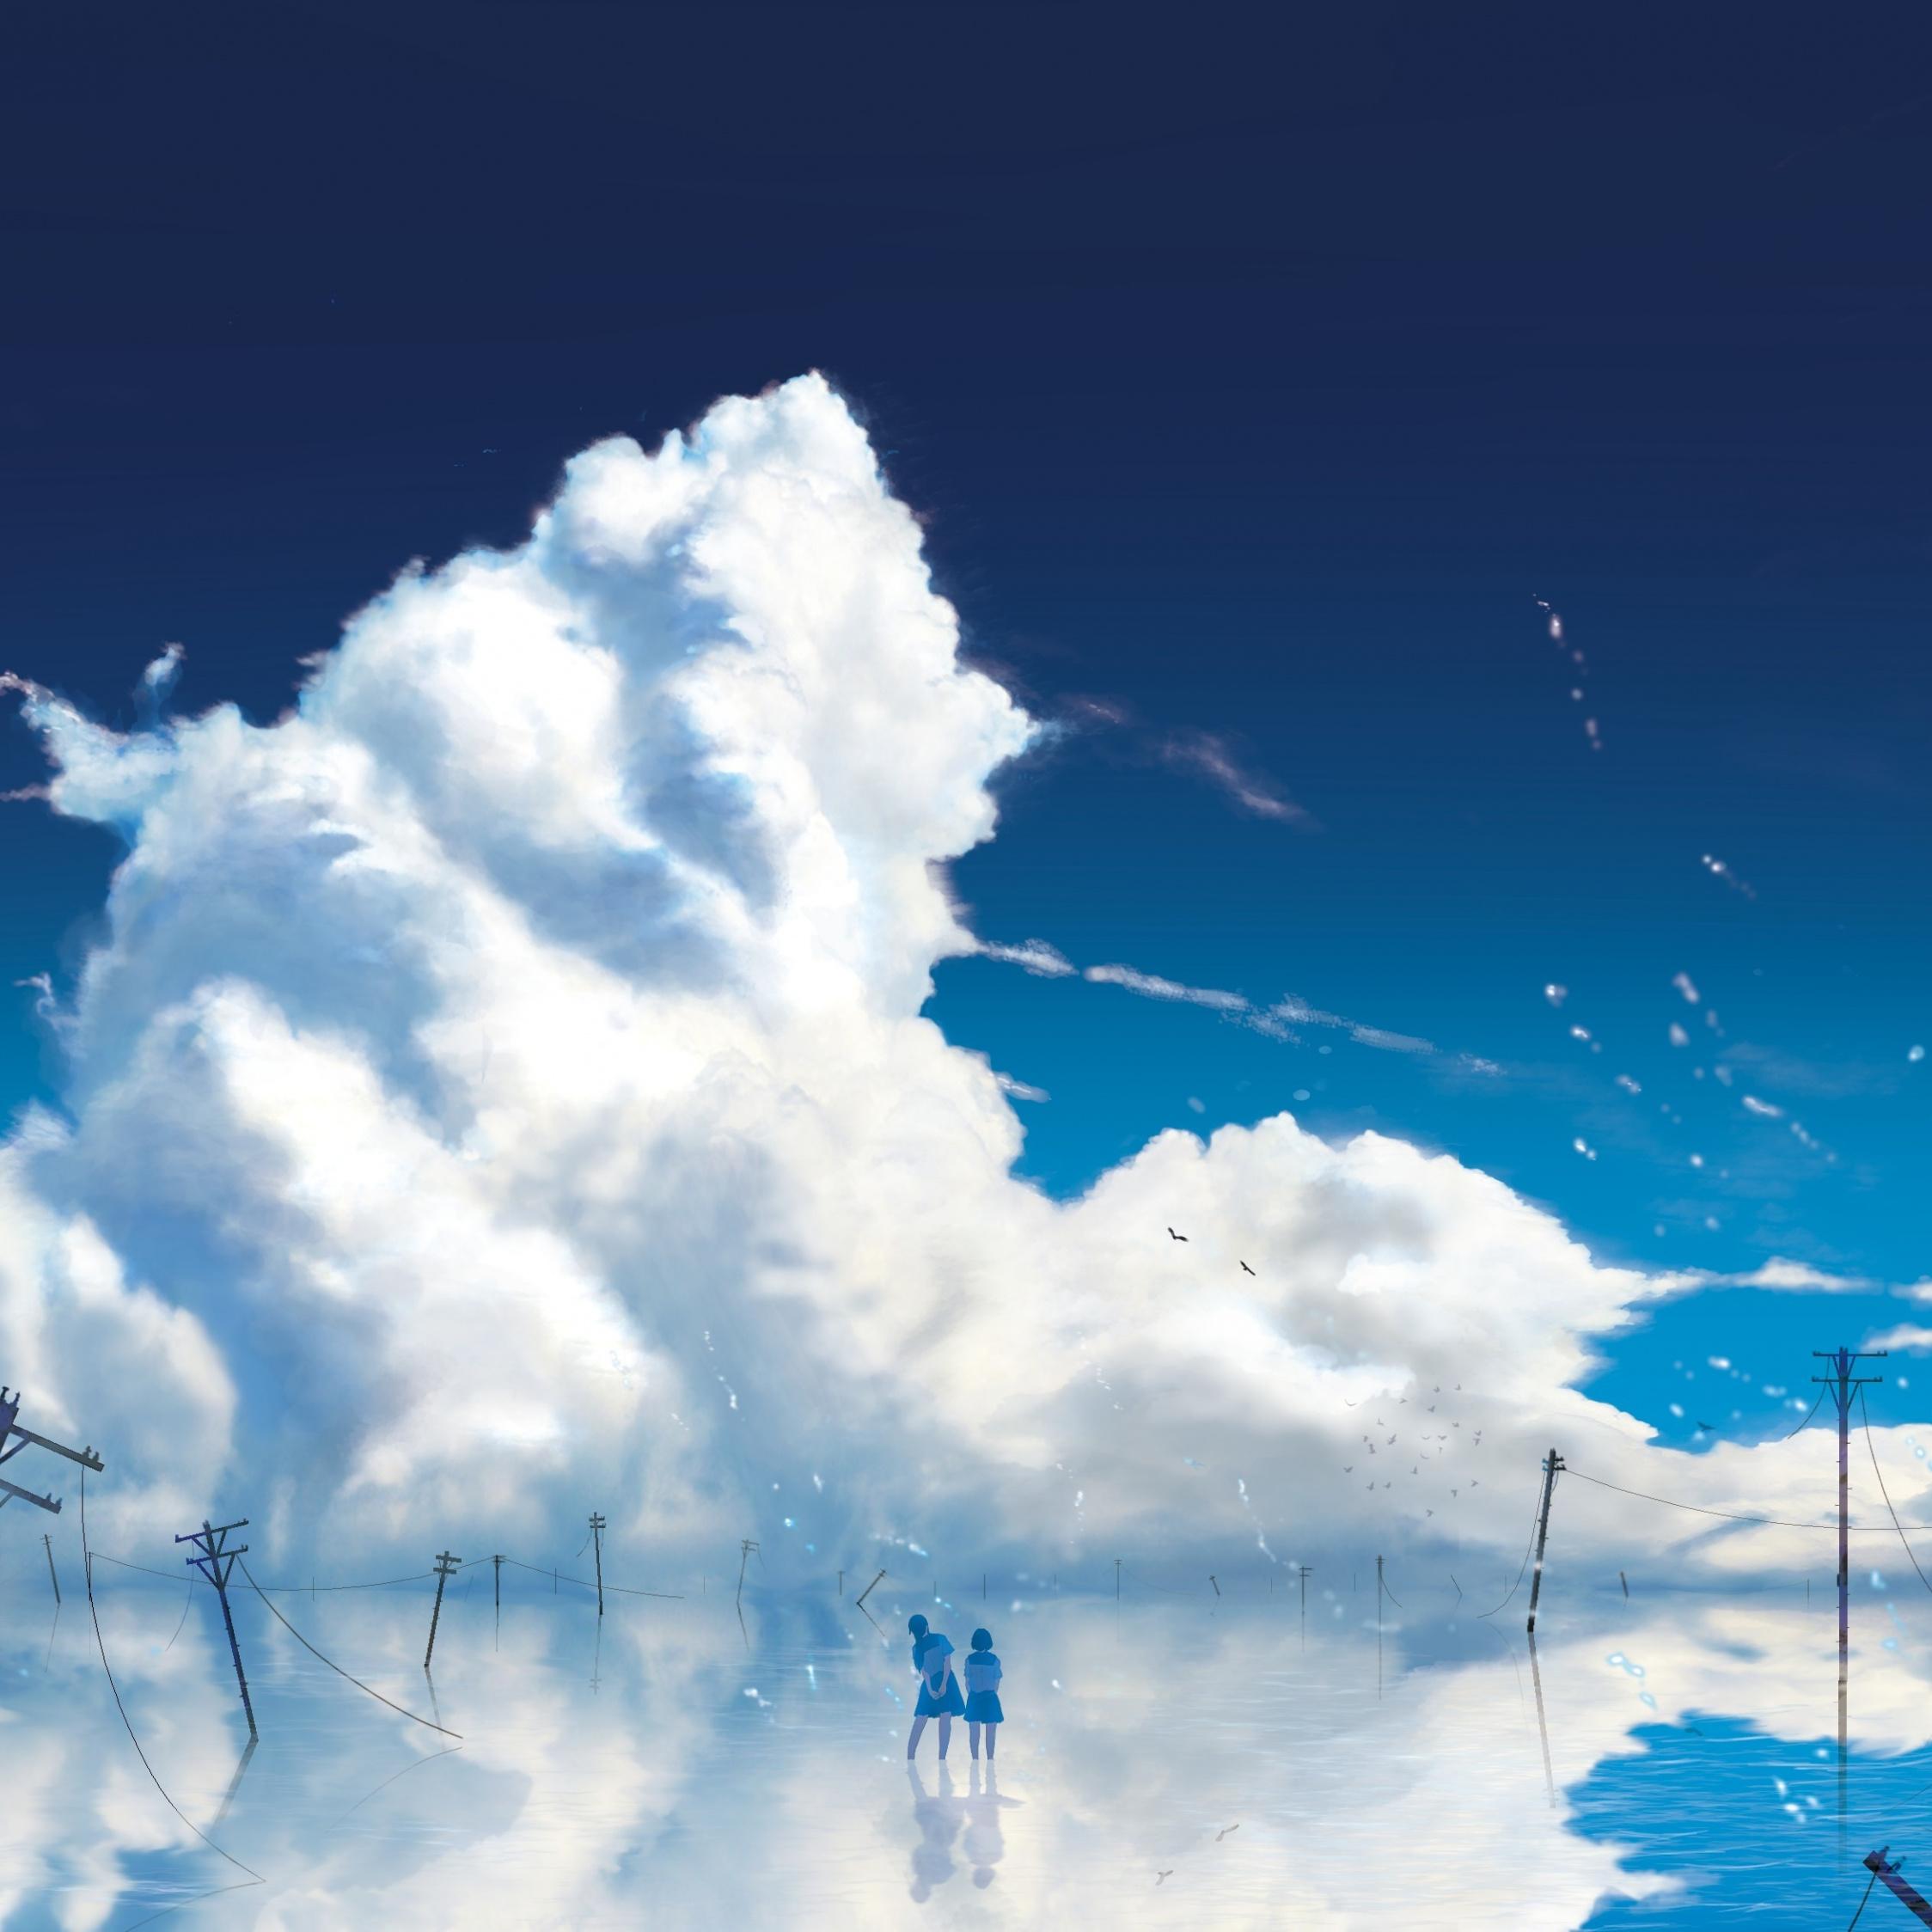 Download 2248x2248 wallpaper anime girls, outdoor, clouds, ipad air